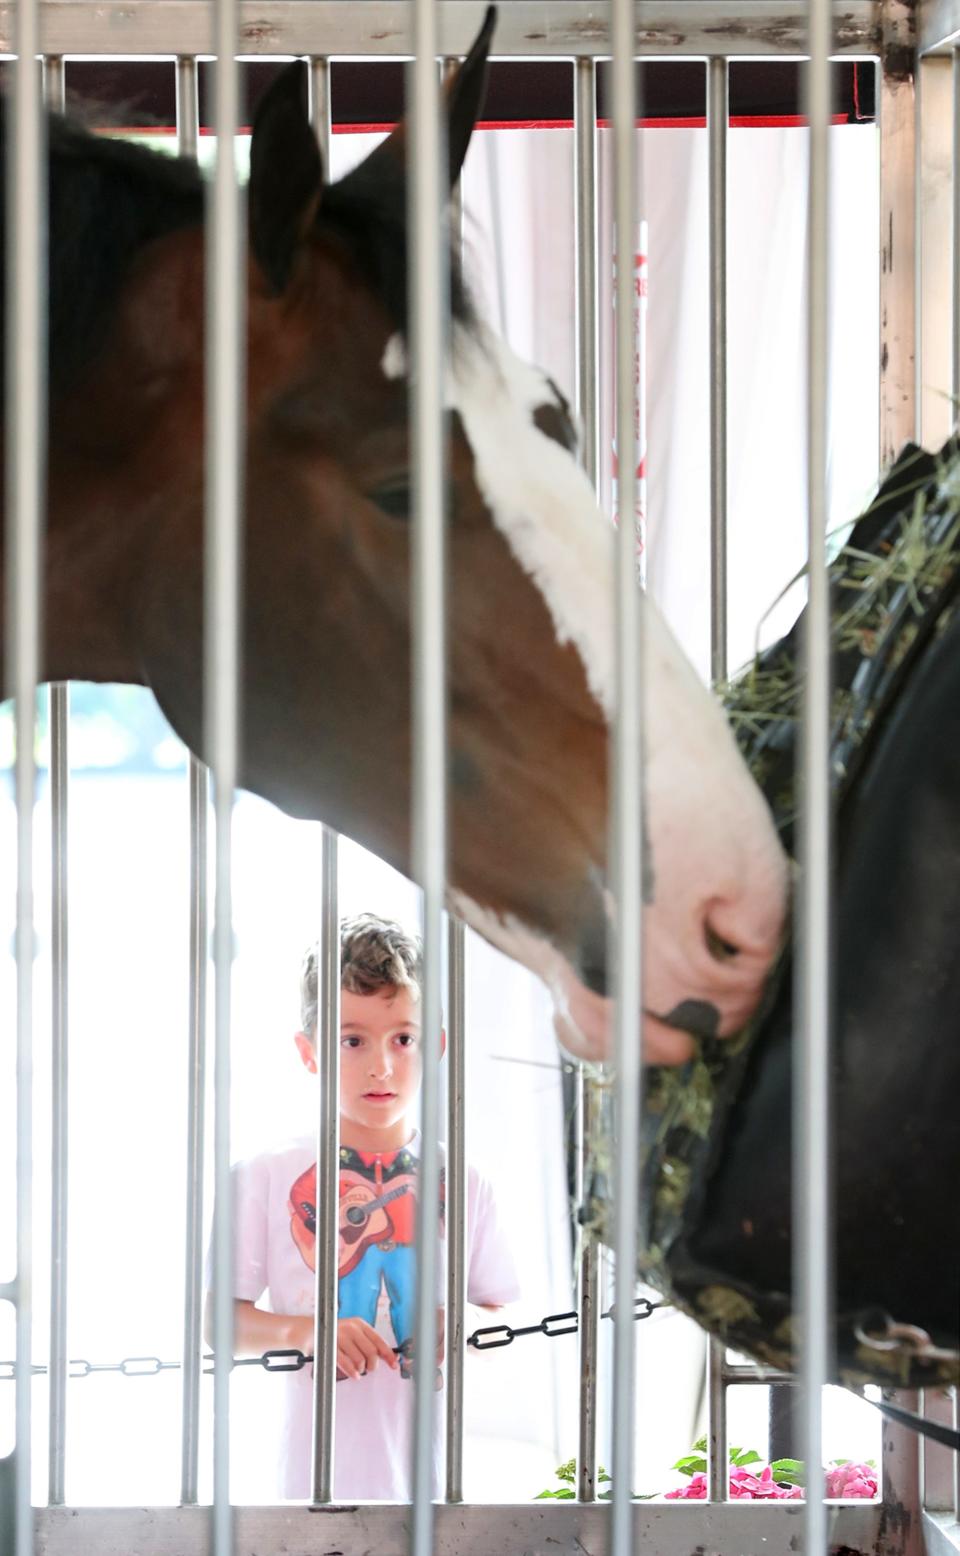 Kaden Clevenger, 5, gazes at one of the Budweiser Clydesdales at the mobile stables at Kent State University's Stark Campus in Jackson Township.